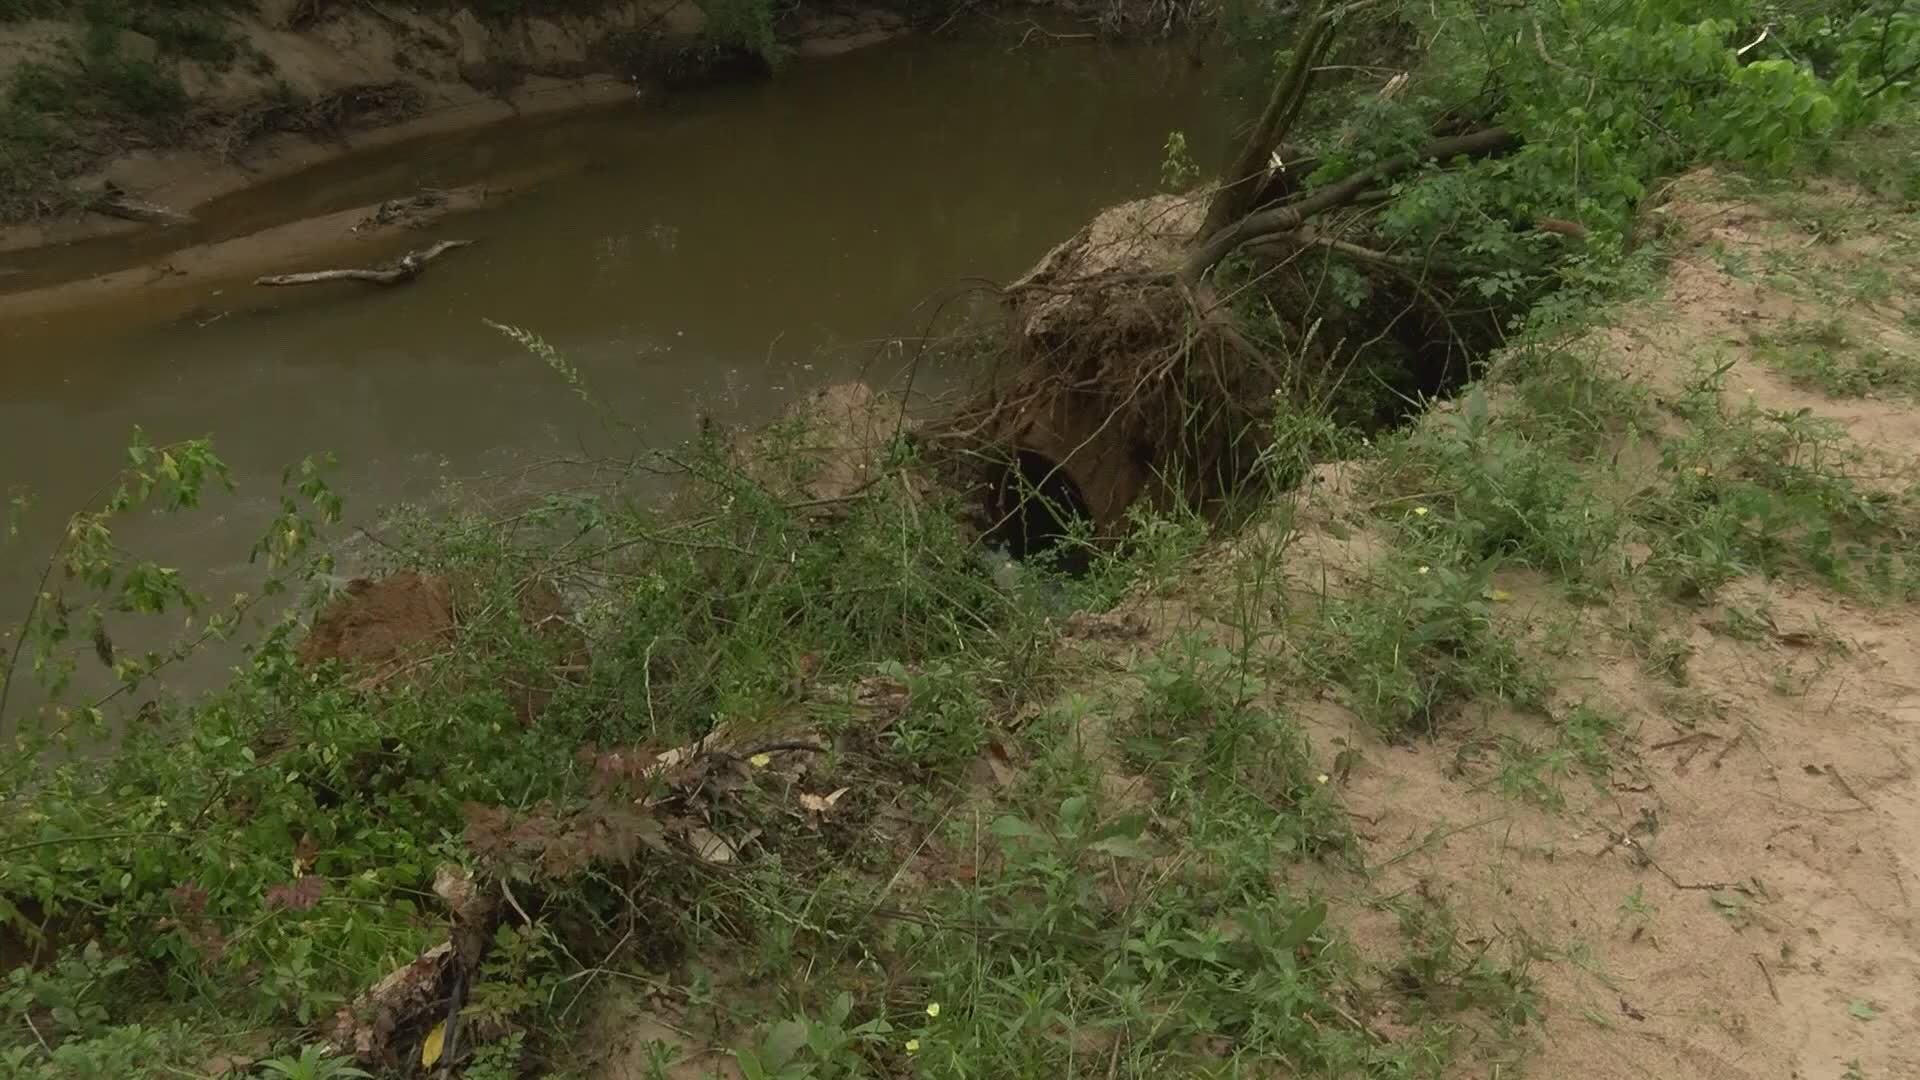 42-inch sewer main collapse causes roughly 100,000 gallons of domestic sewage to spill in Tyler.